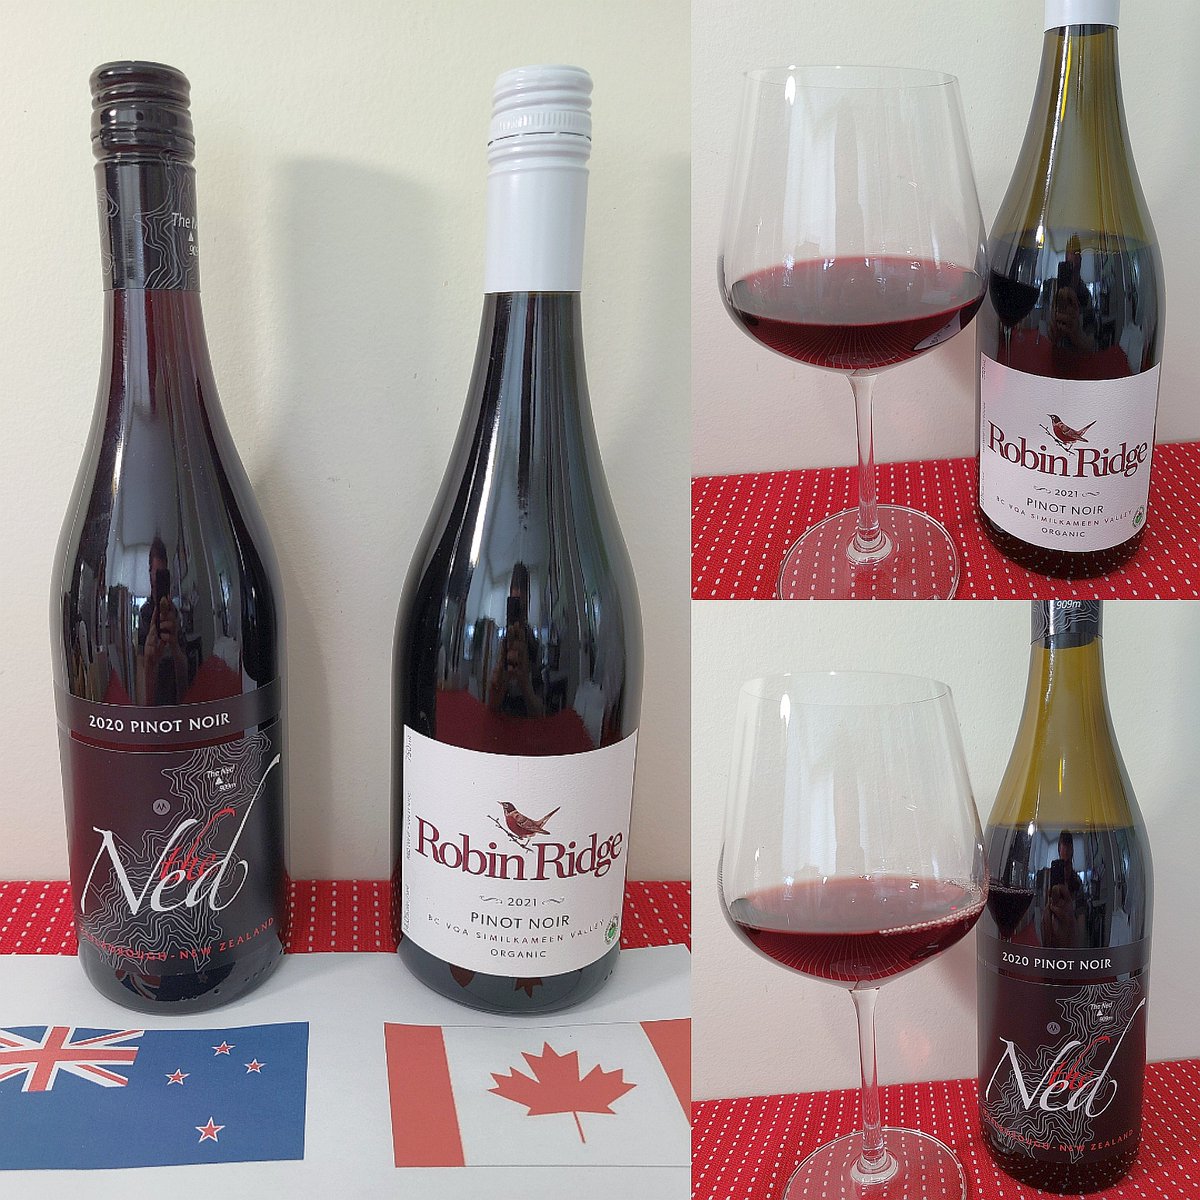 Exploring the Distinctions Between #PinotNoir and #SauvignonBlanc Wines in BC and New Zealand. #NZwine #BCwine #sommelier @bench1775 @FraminghamWines @robinridgewinery @MariscoWine @bcwine wp.me/p1rfI3-9rK